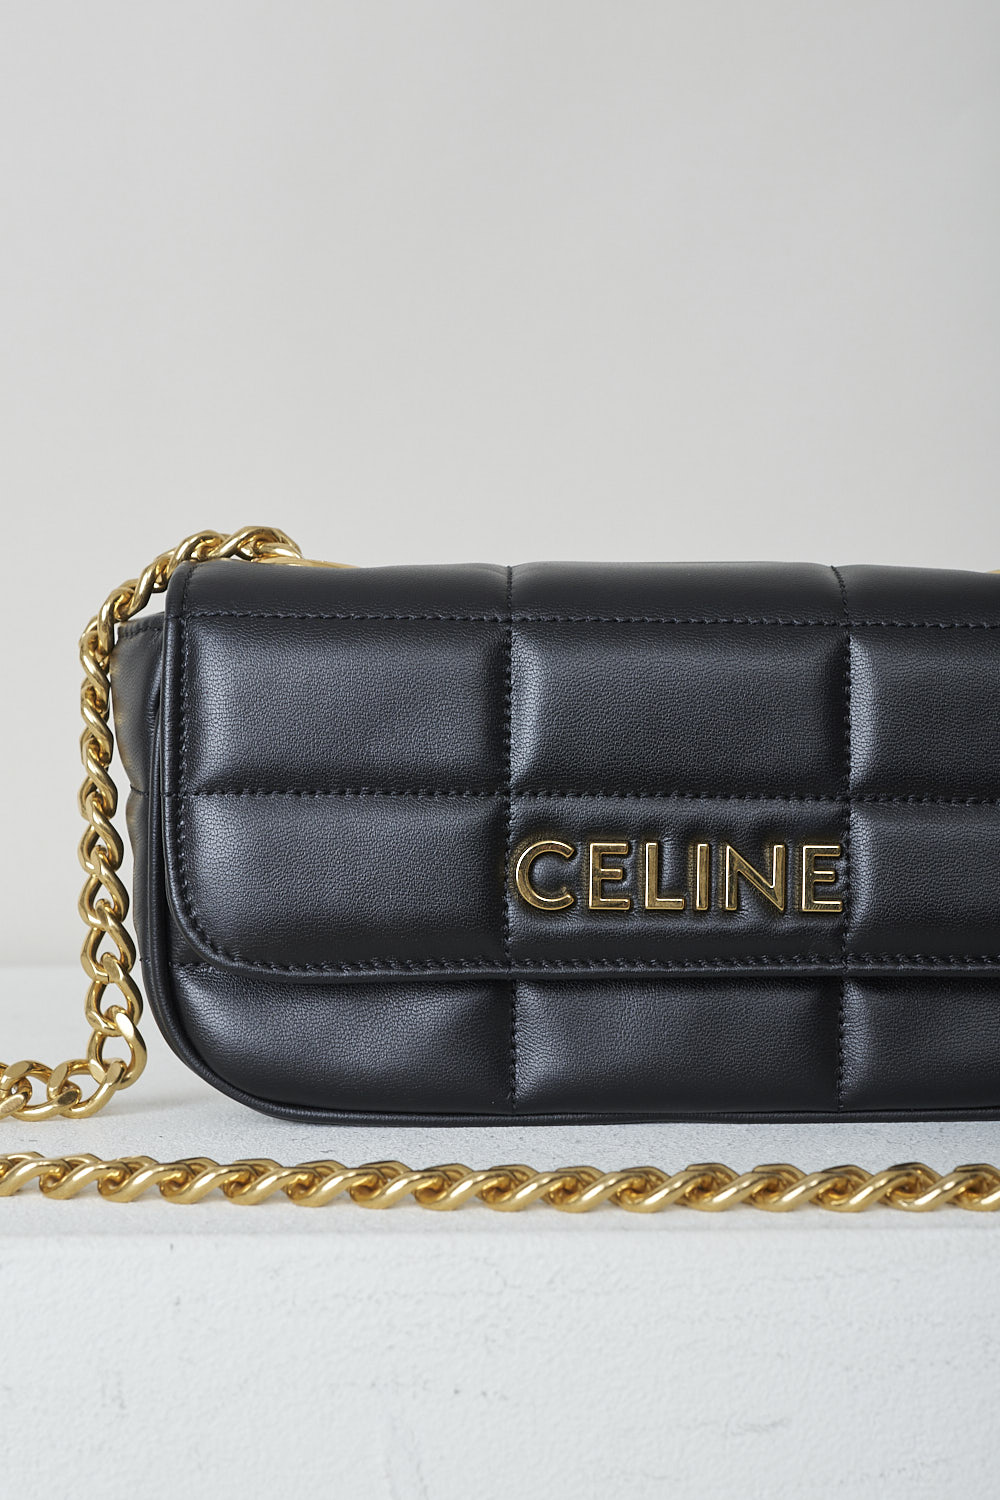 CELINE, BLACK MATELASSÃ‰ MINI CHAIN SHOULDER BAG, 10L333EWJ_38NO, Black, Detail, This black matelassÃ© mini shoulder bag has gold-tone metal hardware with the brand's lettering on the front and a gold chain shoulder strap. The bag has a snap button closure. The flap opens to the main compartment with a inner pocket to the backside.  
